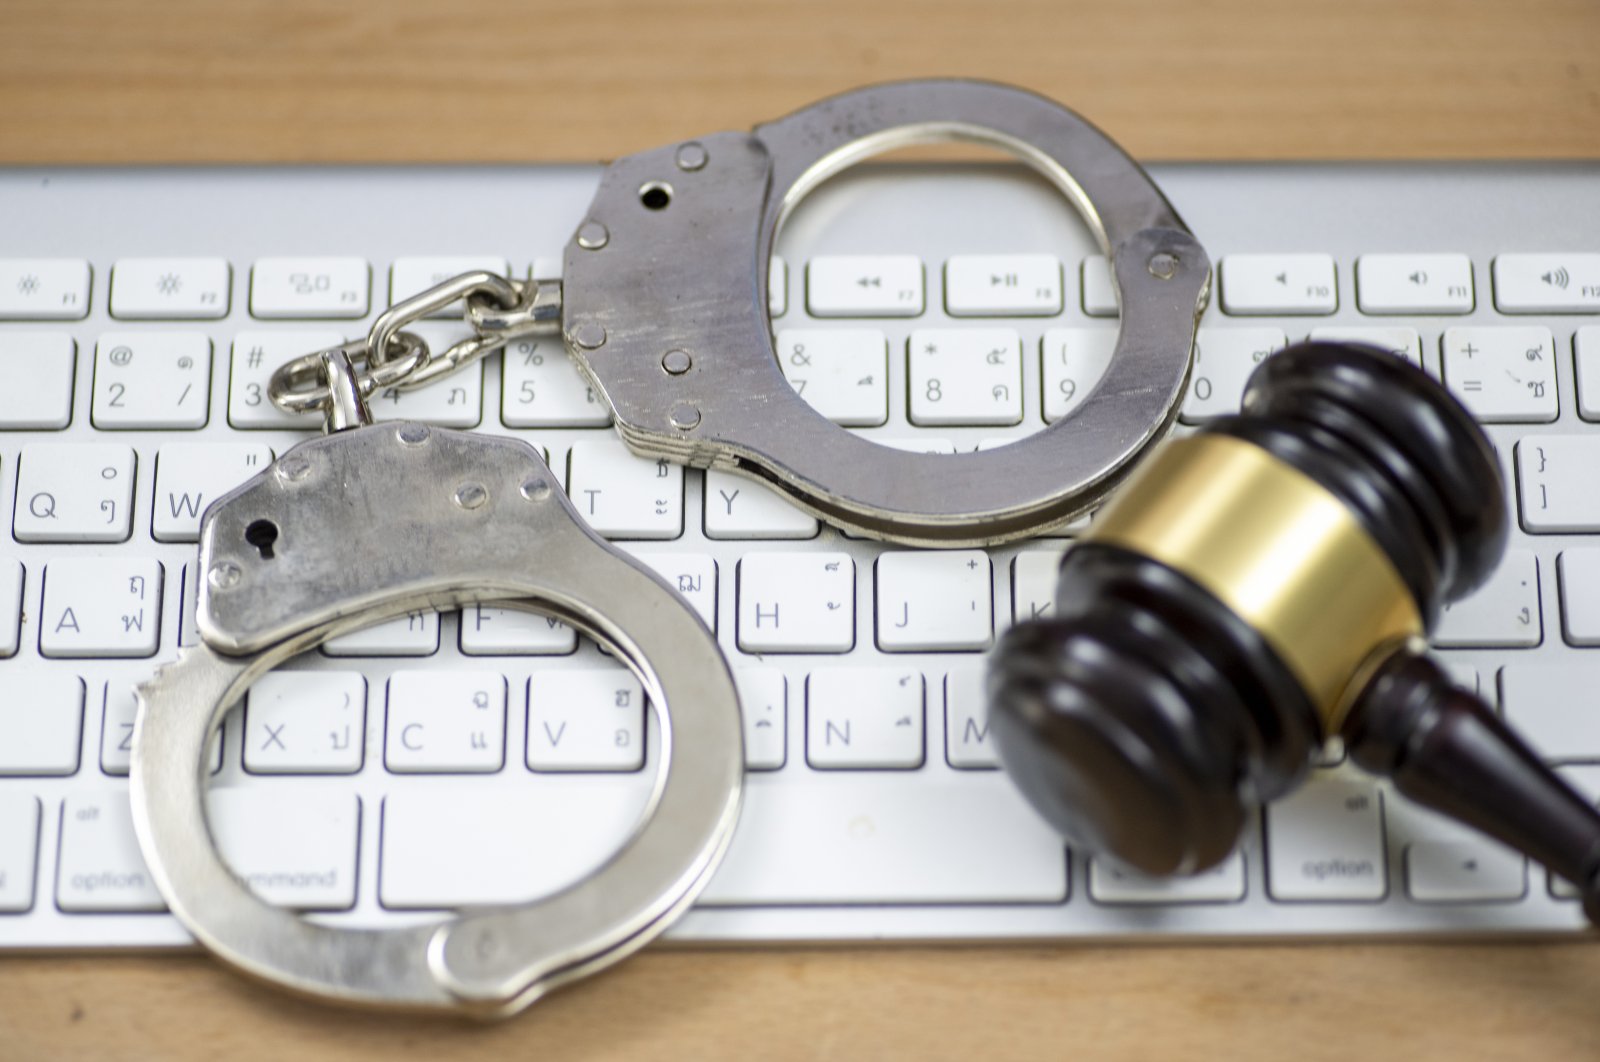 Handcuffs and a wooden gavel on a keyboard. (Getty Images Photo)